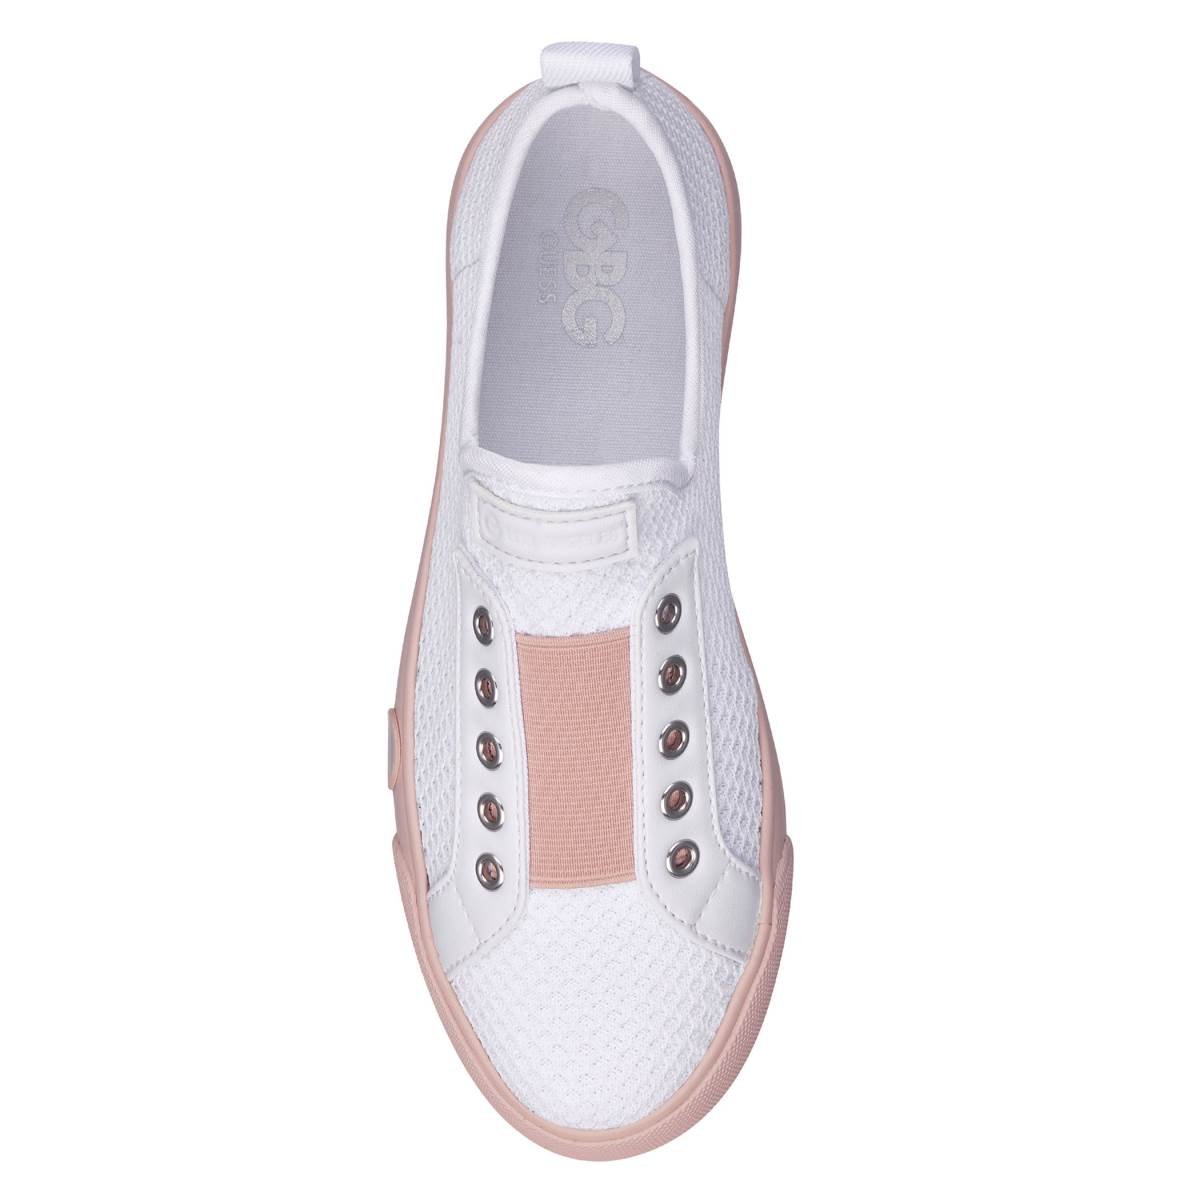 Tenis Flat Blanco G By Guess